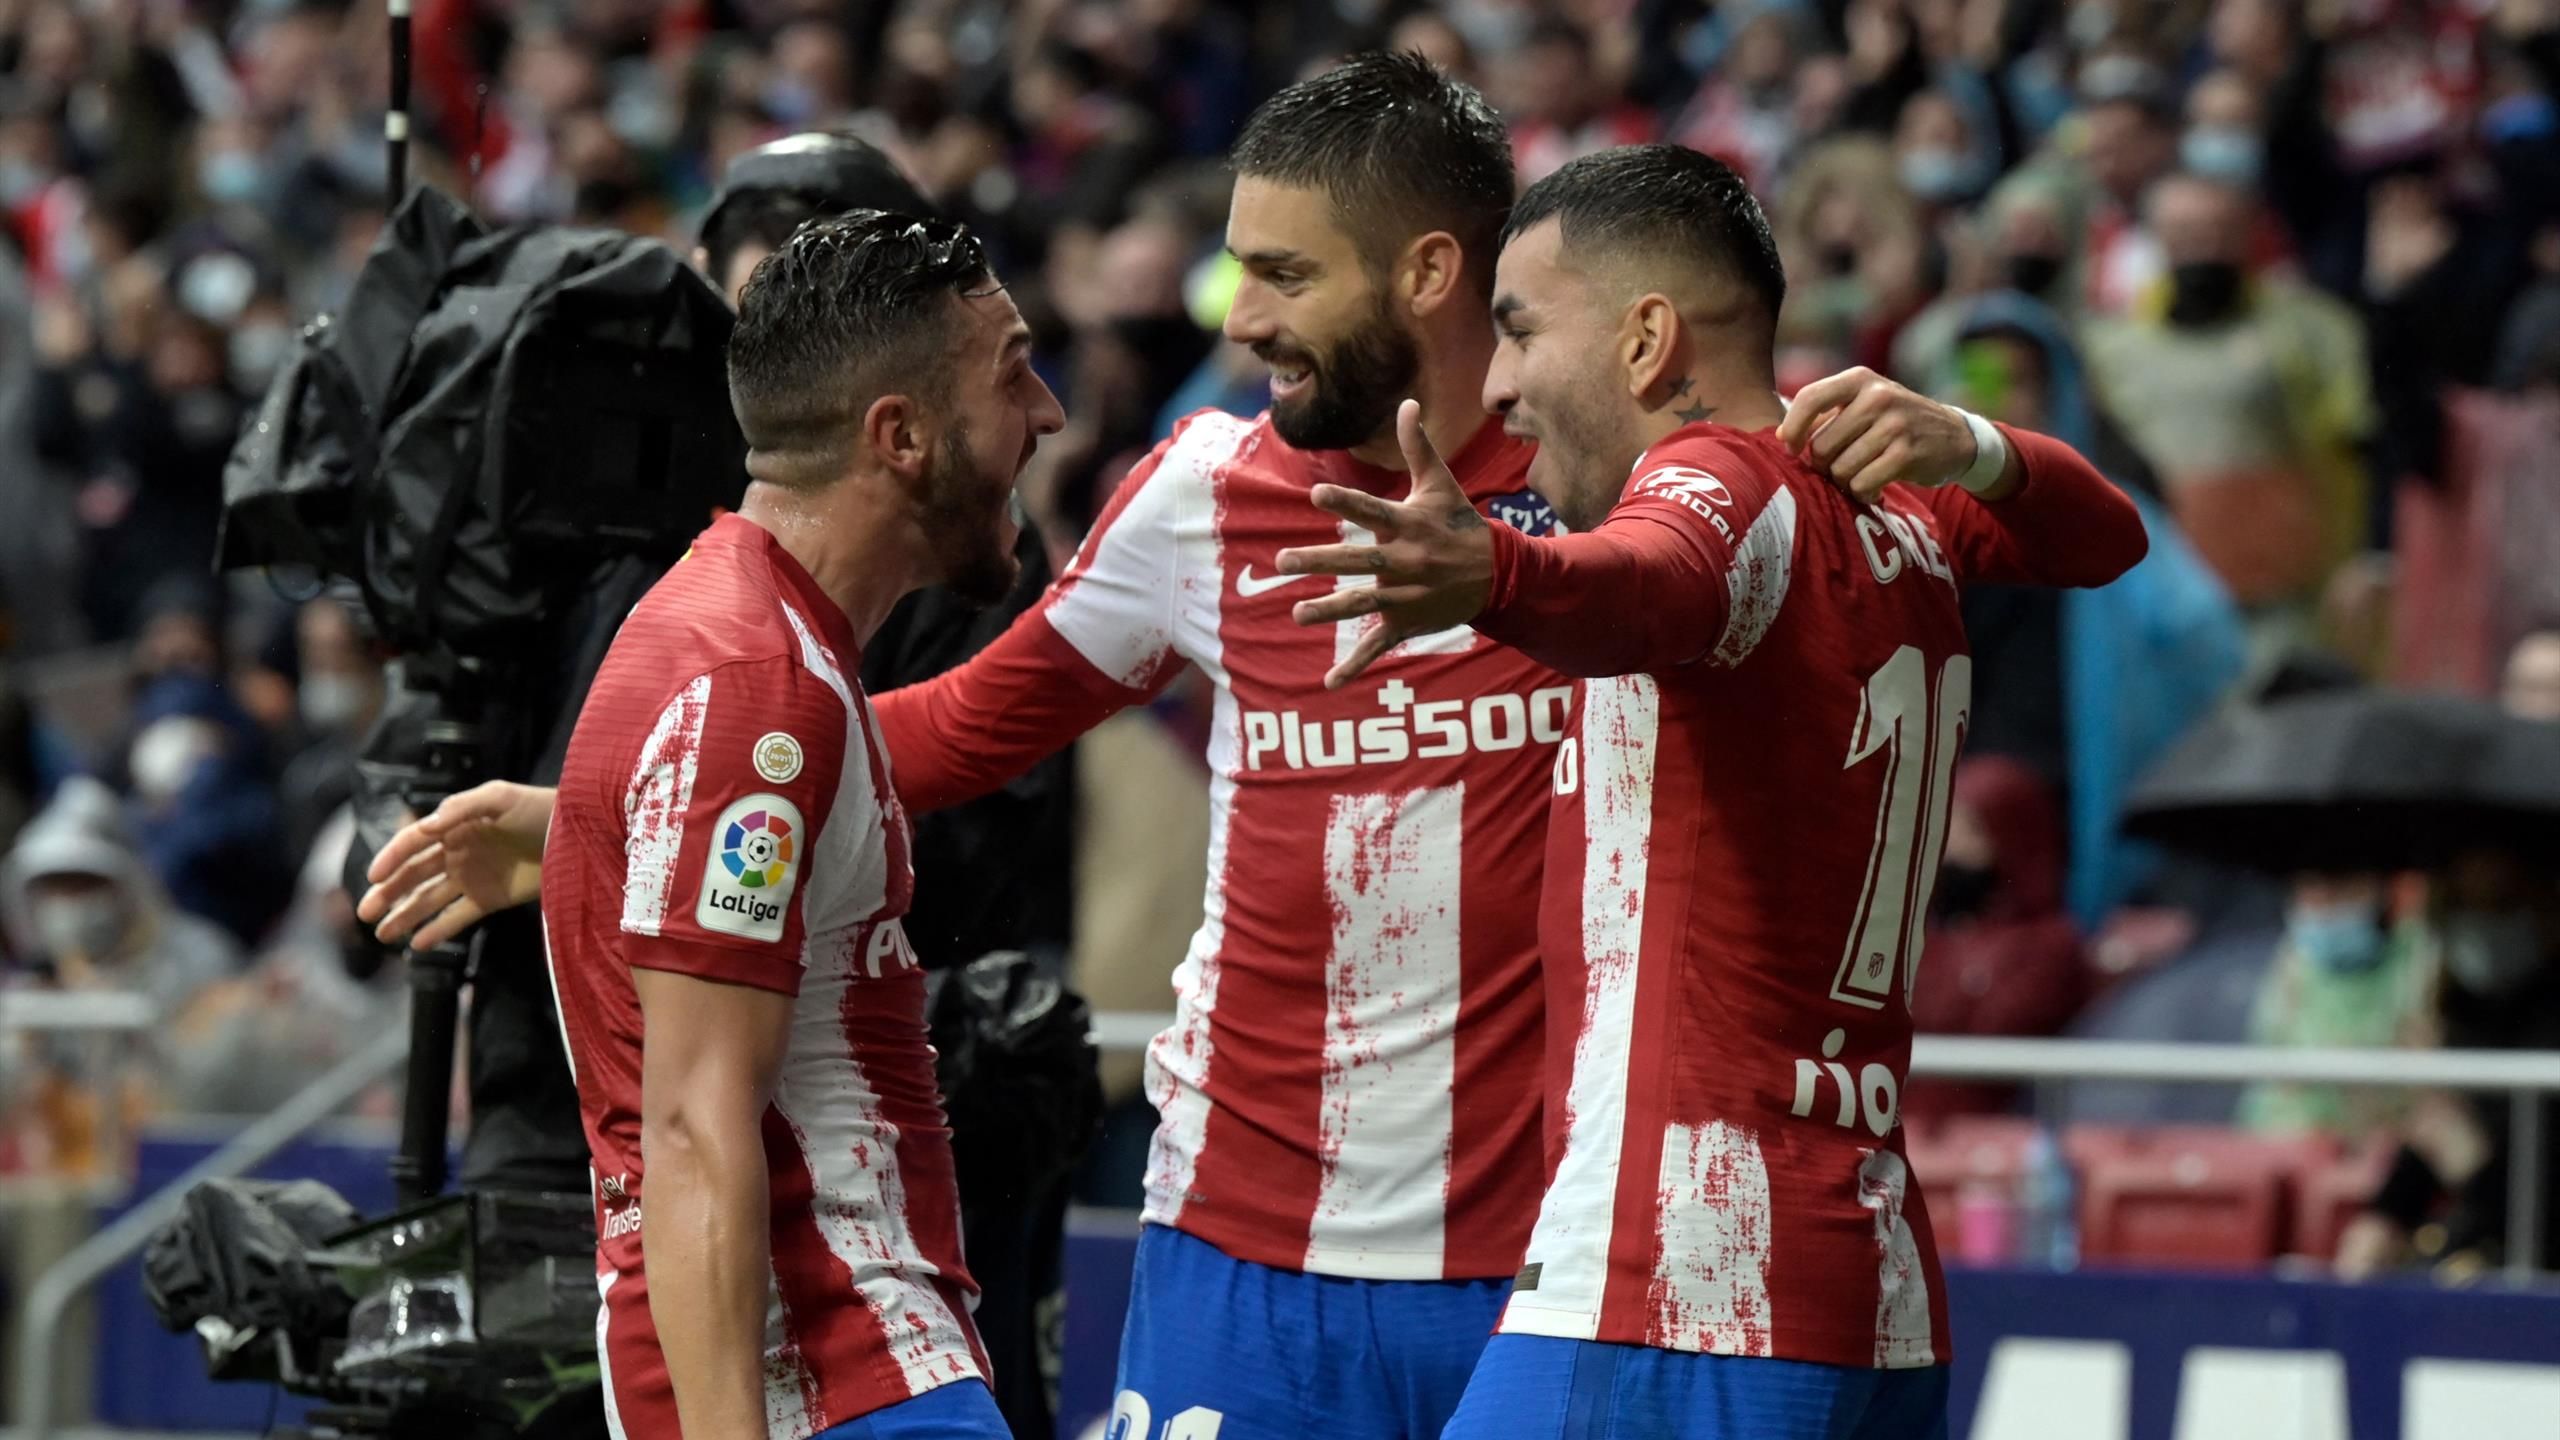 Atletico Madrid 3-0 Real Betis: and Joao Felix among the goals as champions close in on Liga leaders - Eurosport